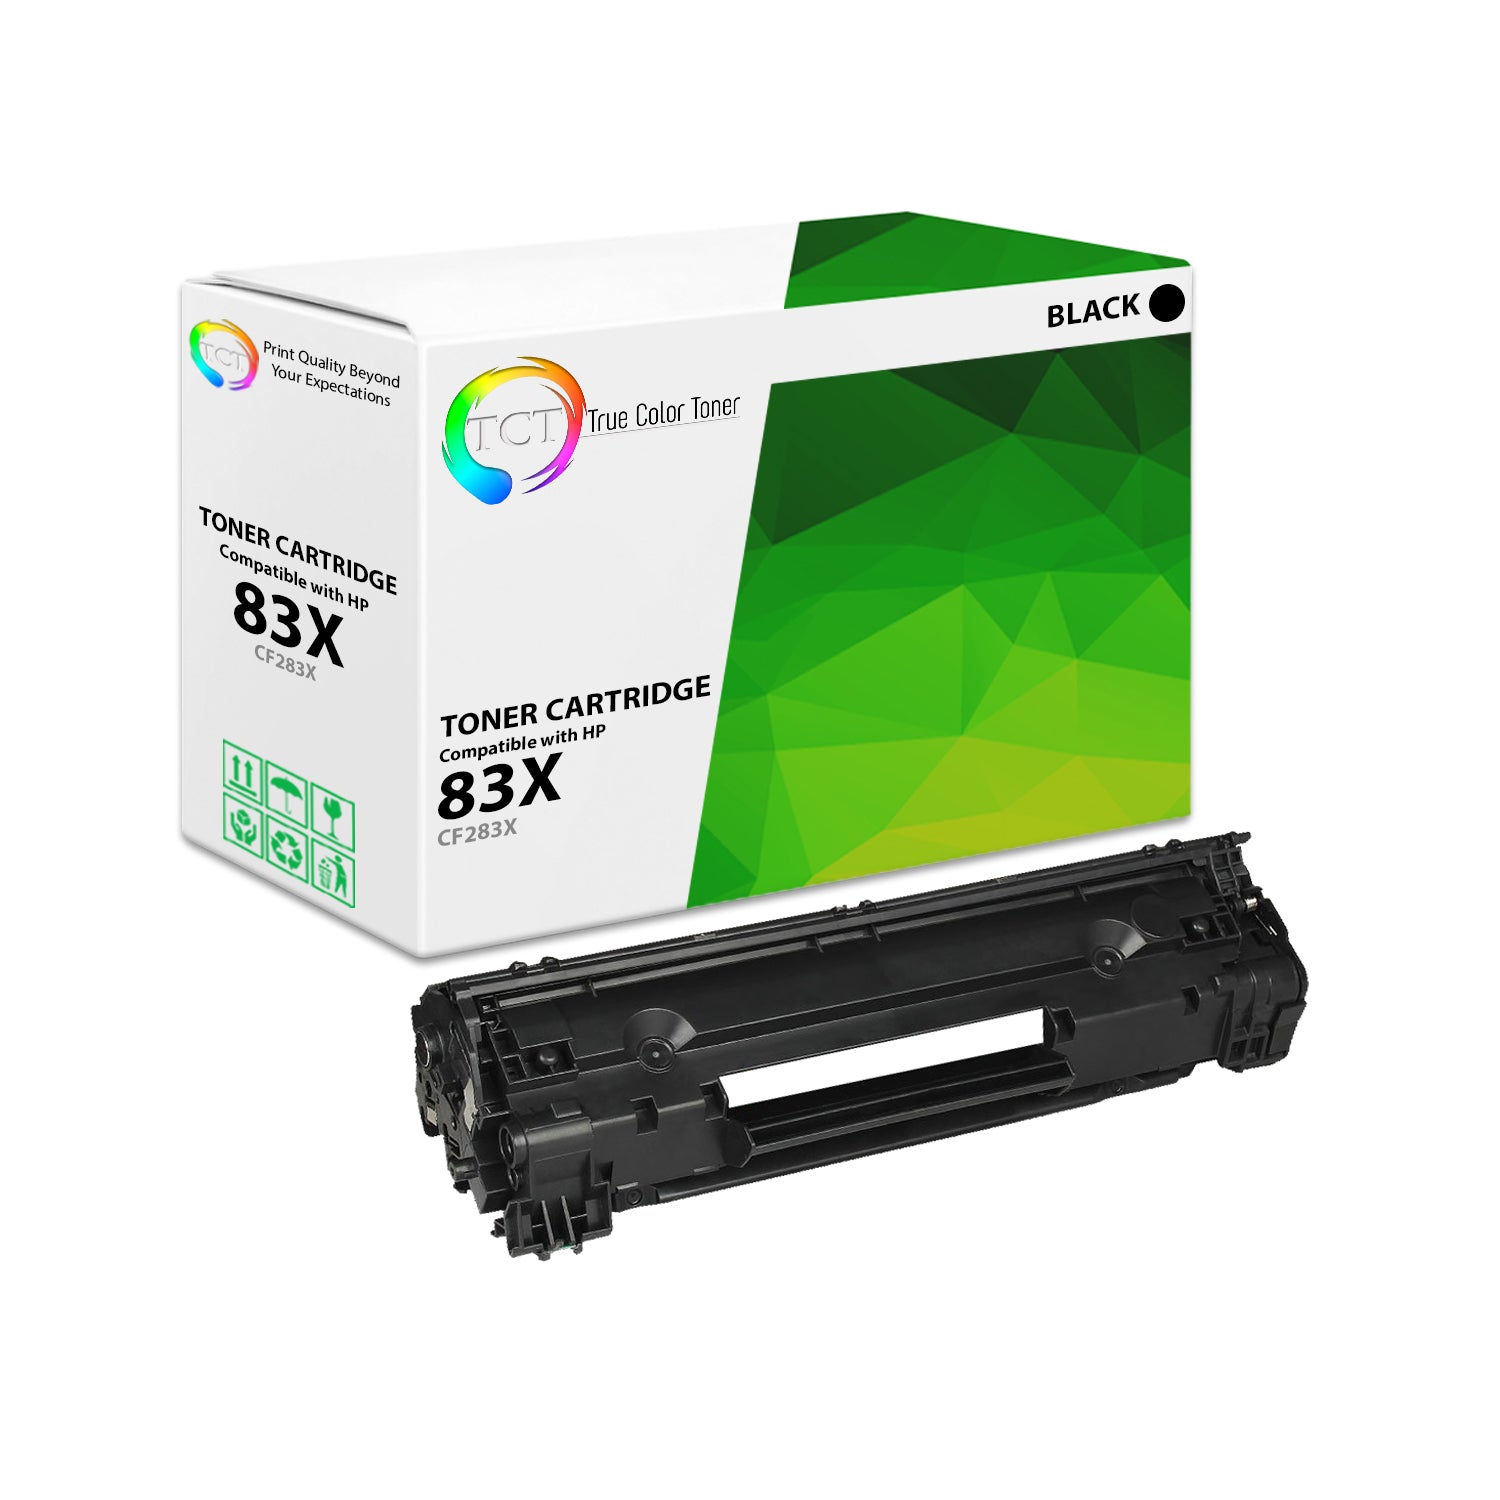 TCT Compatible High Yield Toner Cartridge Replacement for the HP 83X Series - 1 Pack Black